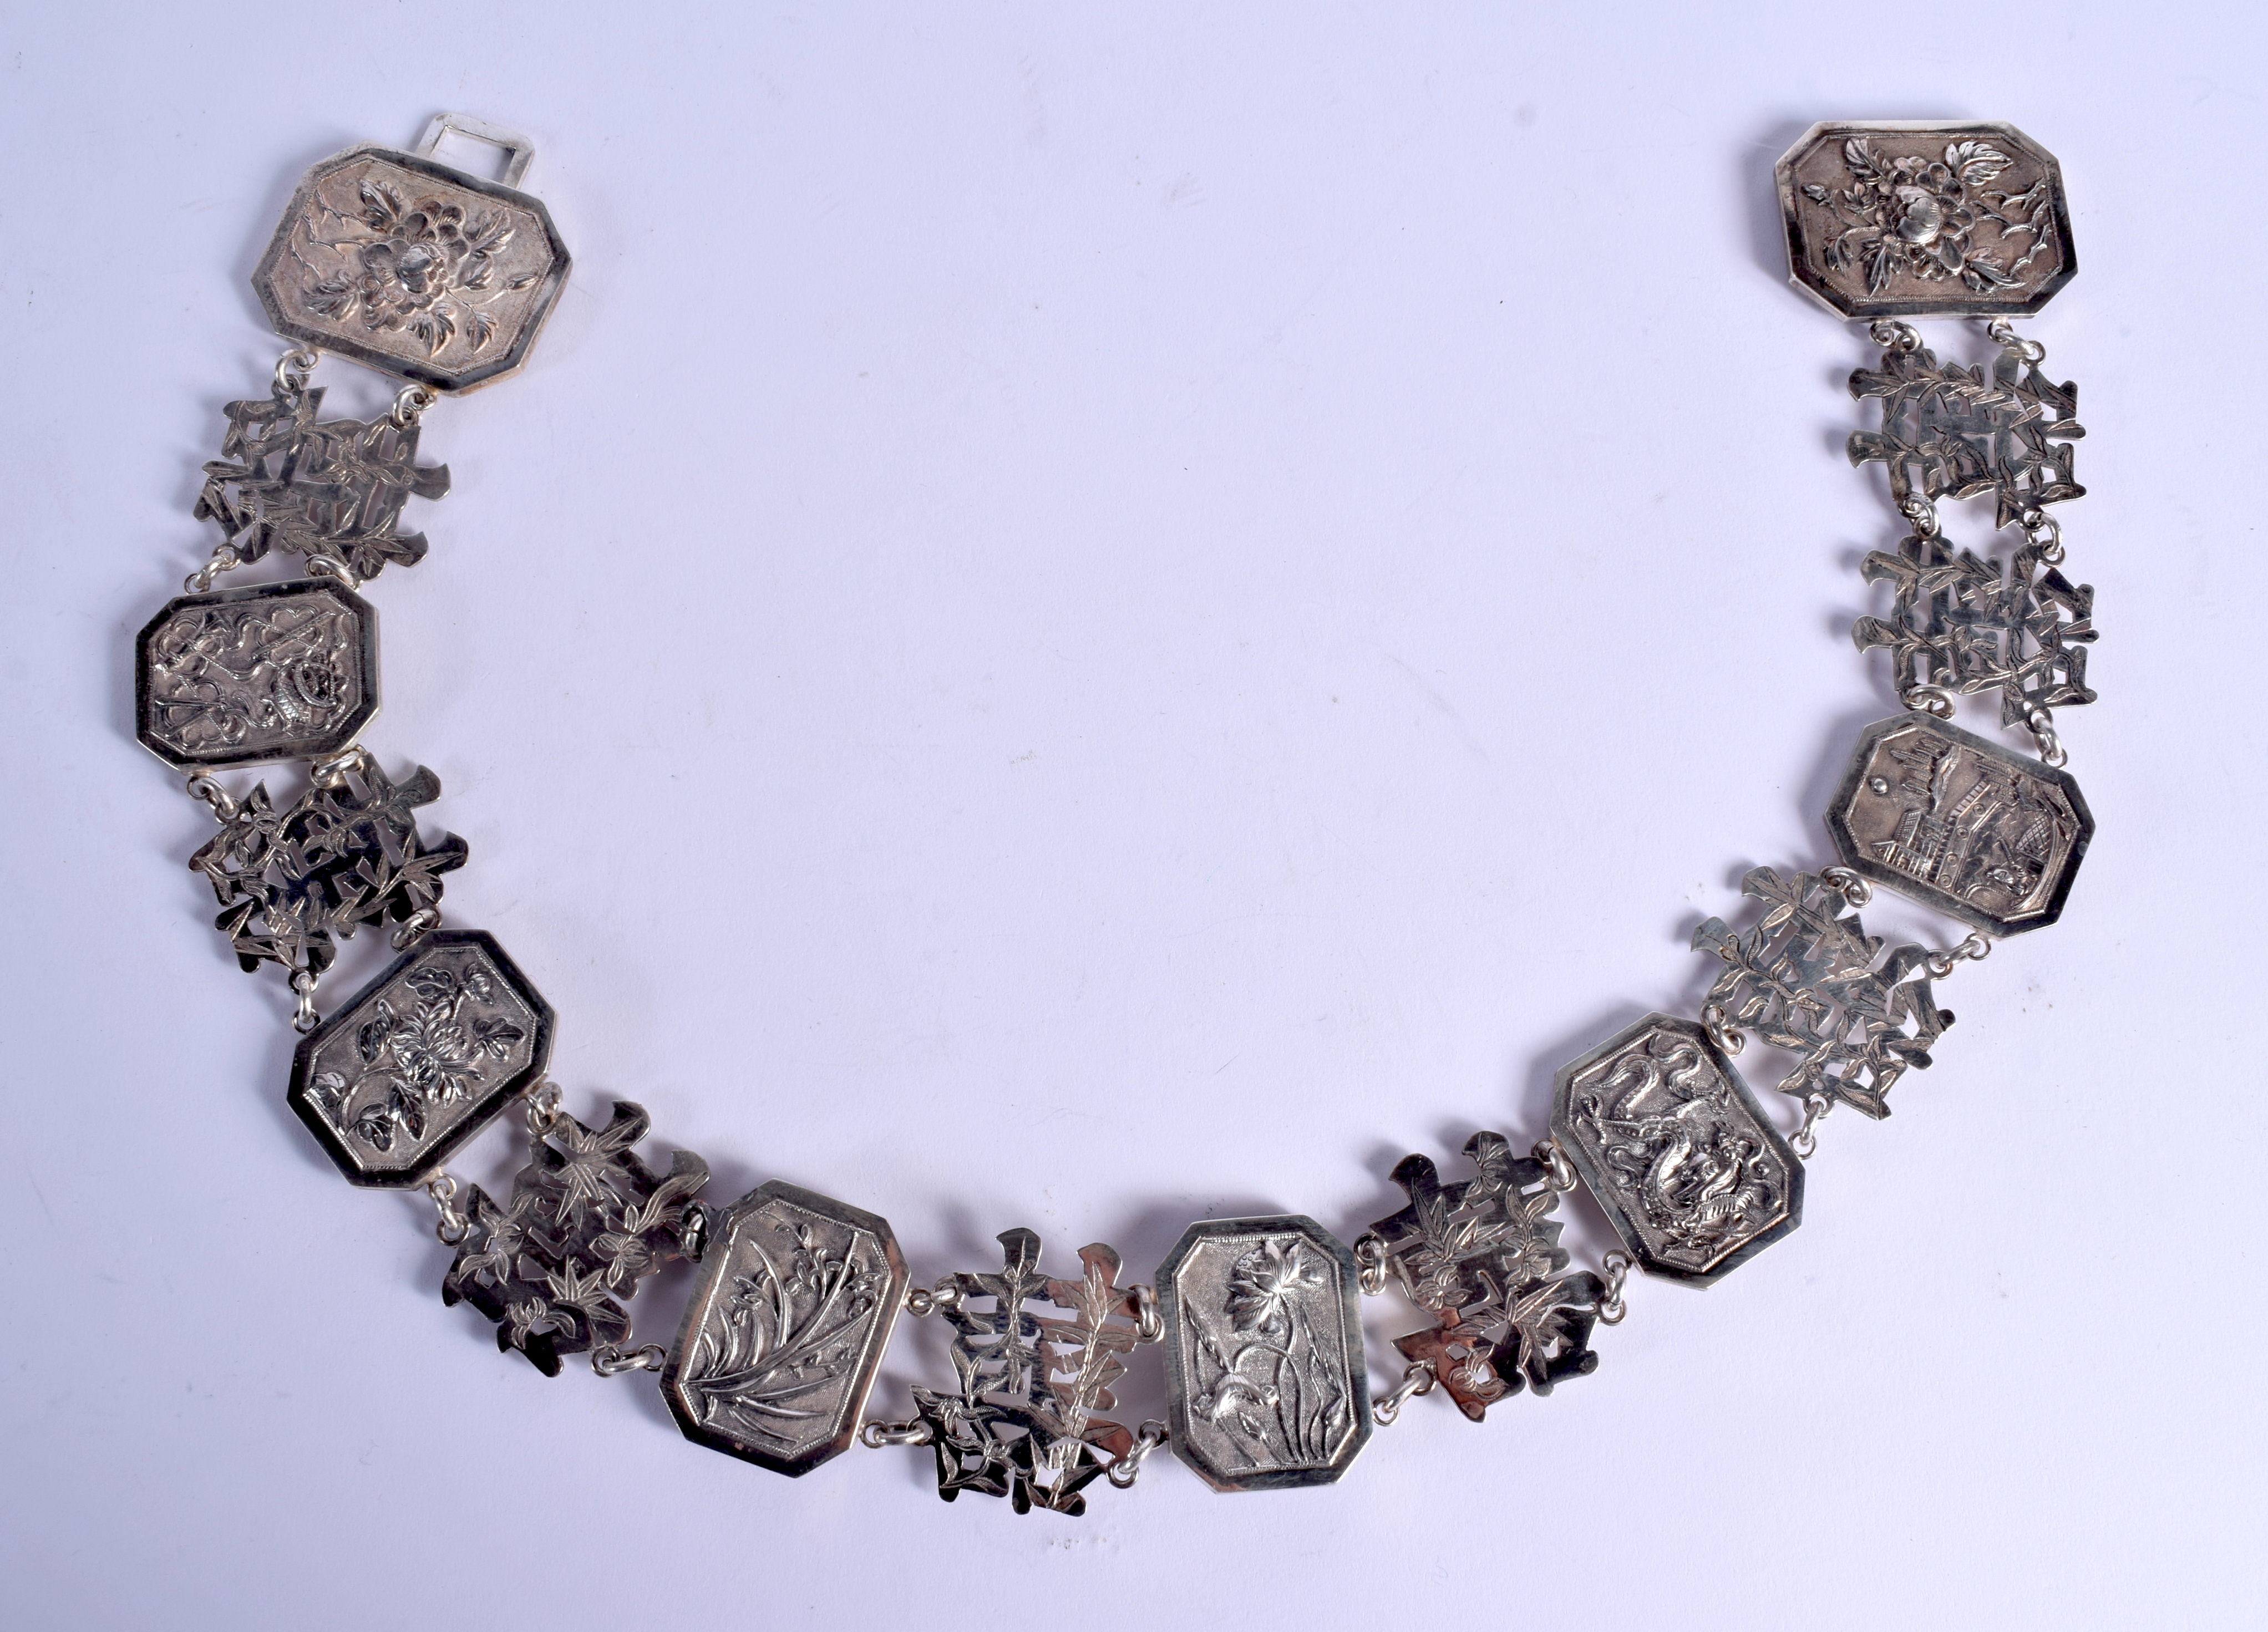 A LATE 19TH CENTURY CHINESE EXPORT SILVER BELT. 174 grams. 66 cm x 5.5 cm.